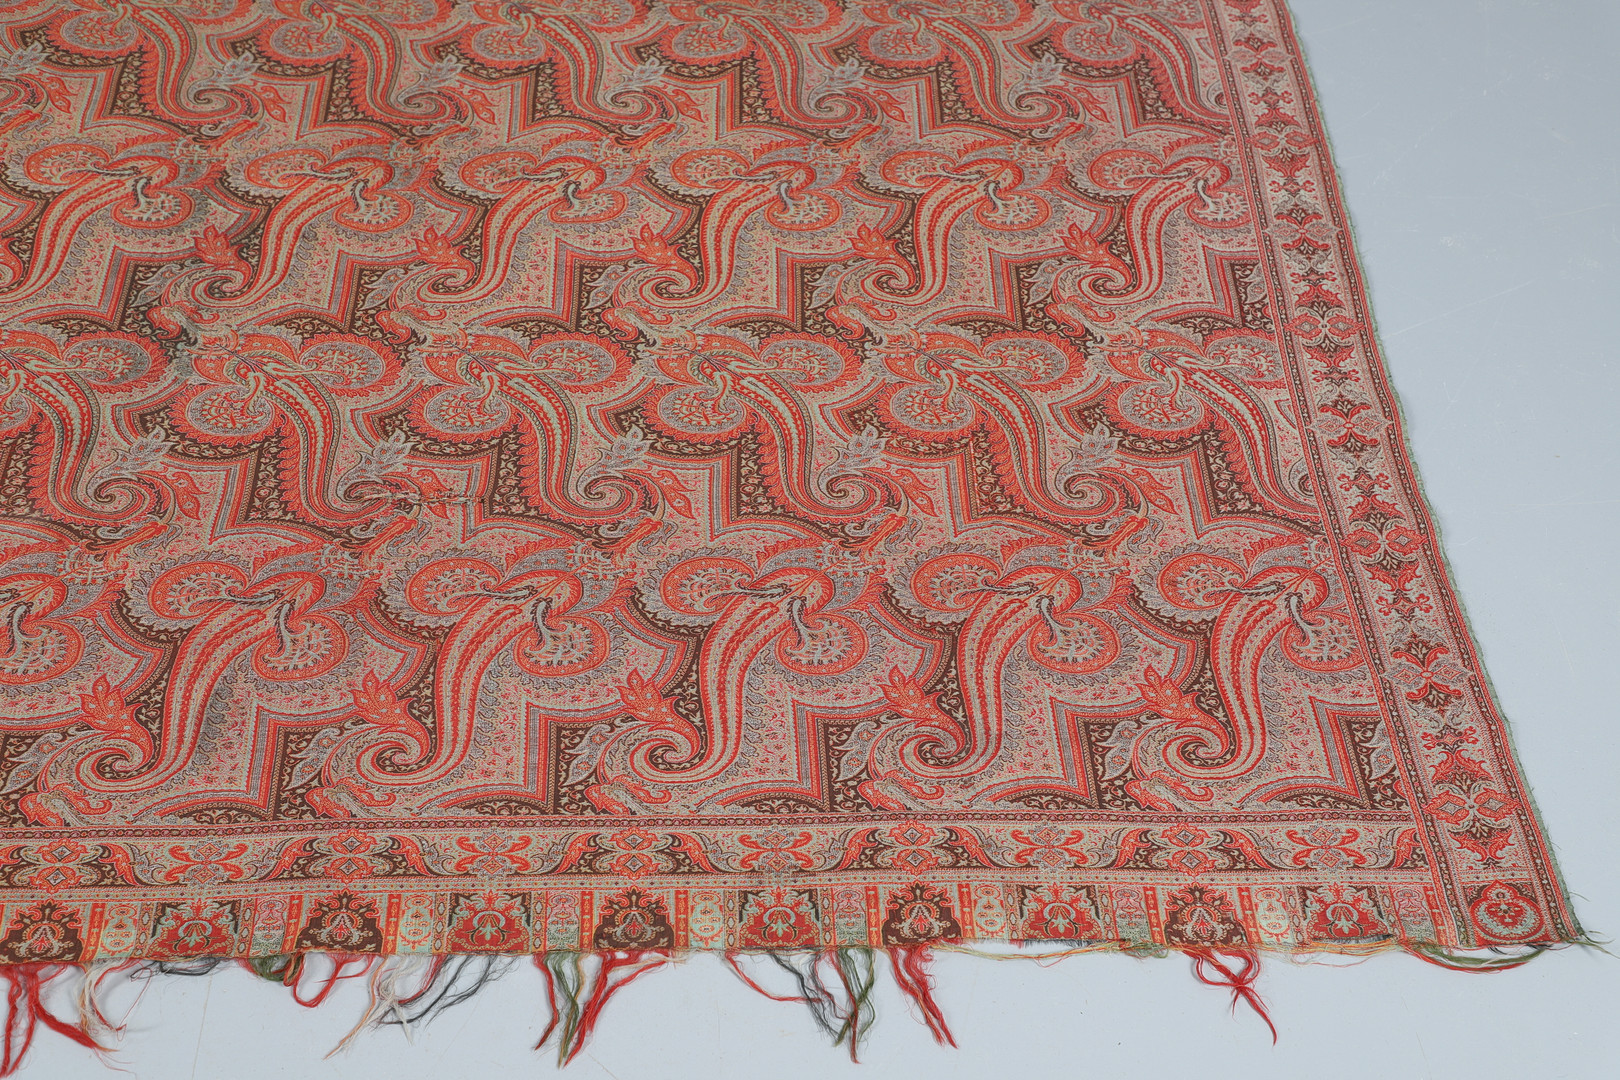 LATE 19THC PAISLEY SHAWL & VARIOUS TEXTILES. - Image 24 of 26